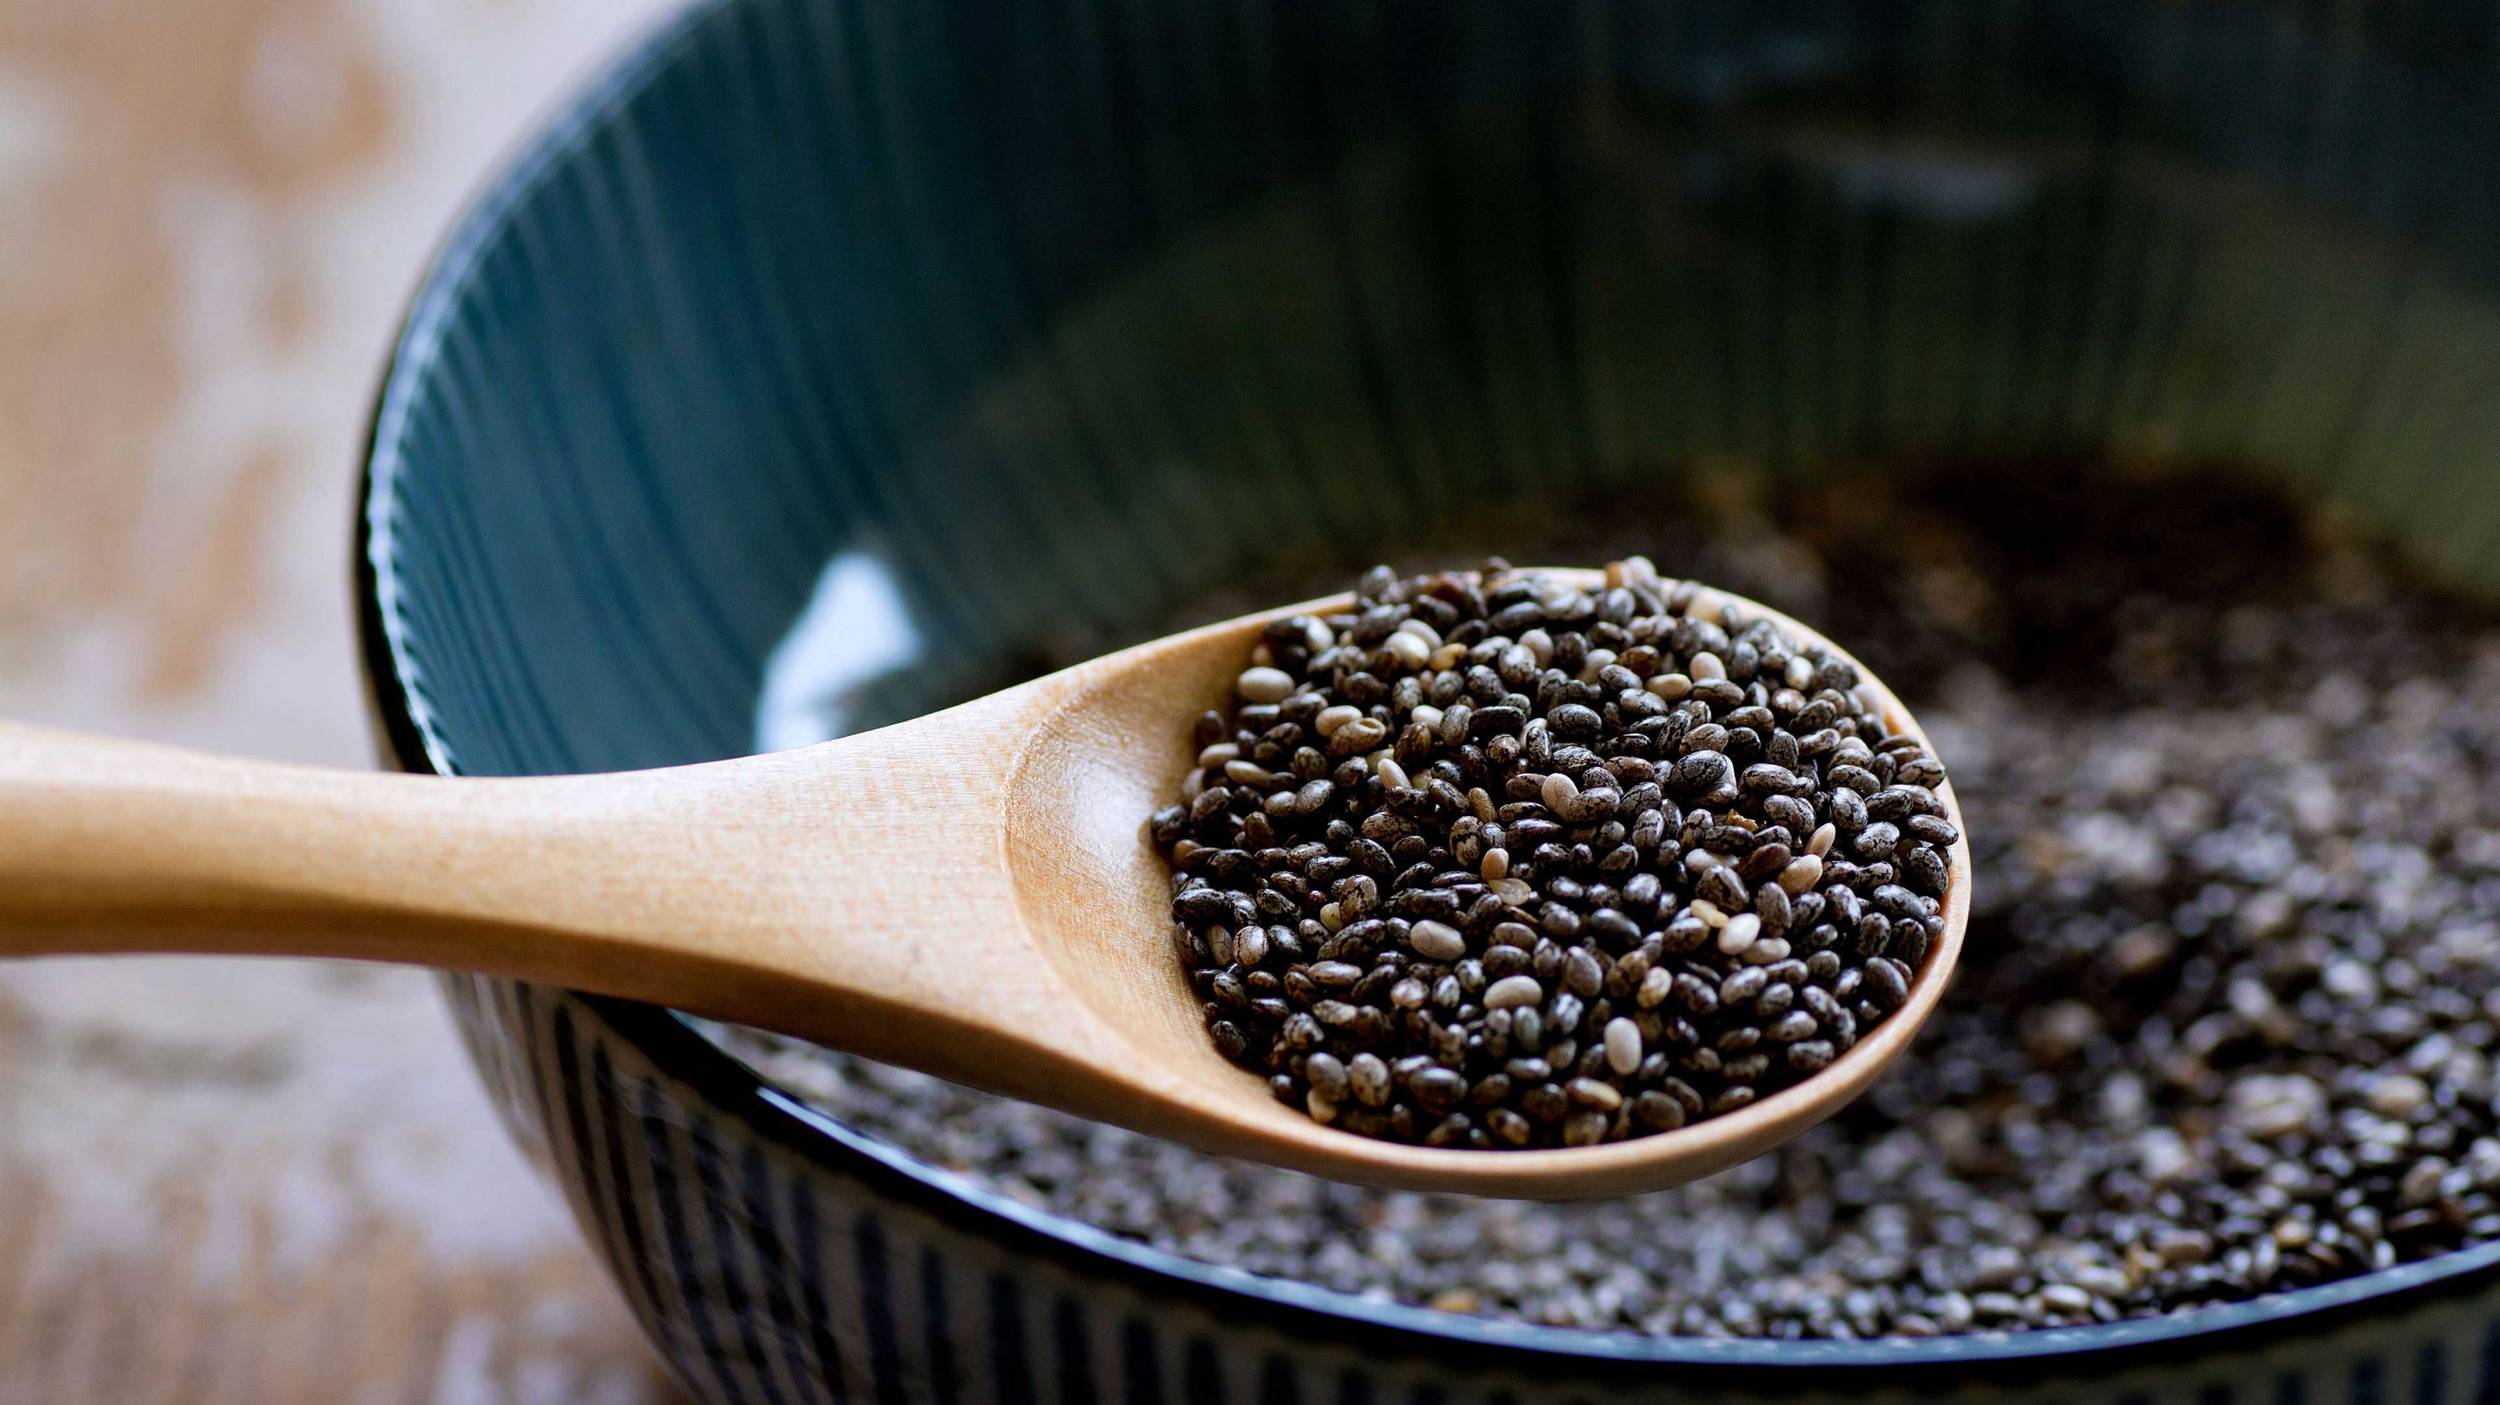 Do Chia Seeds Help You Lose Weight?